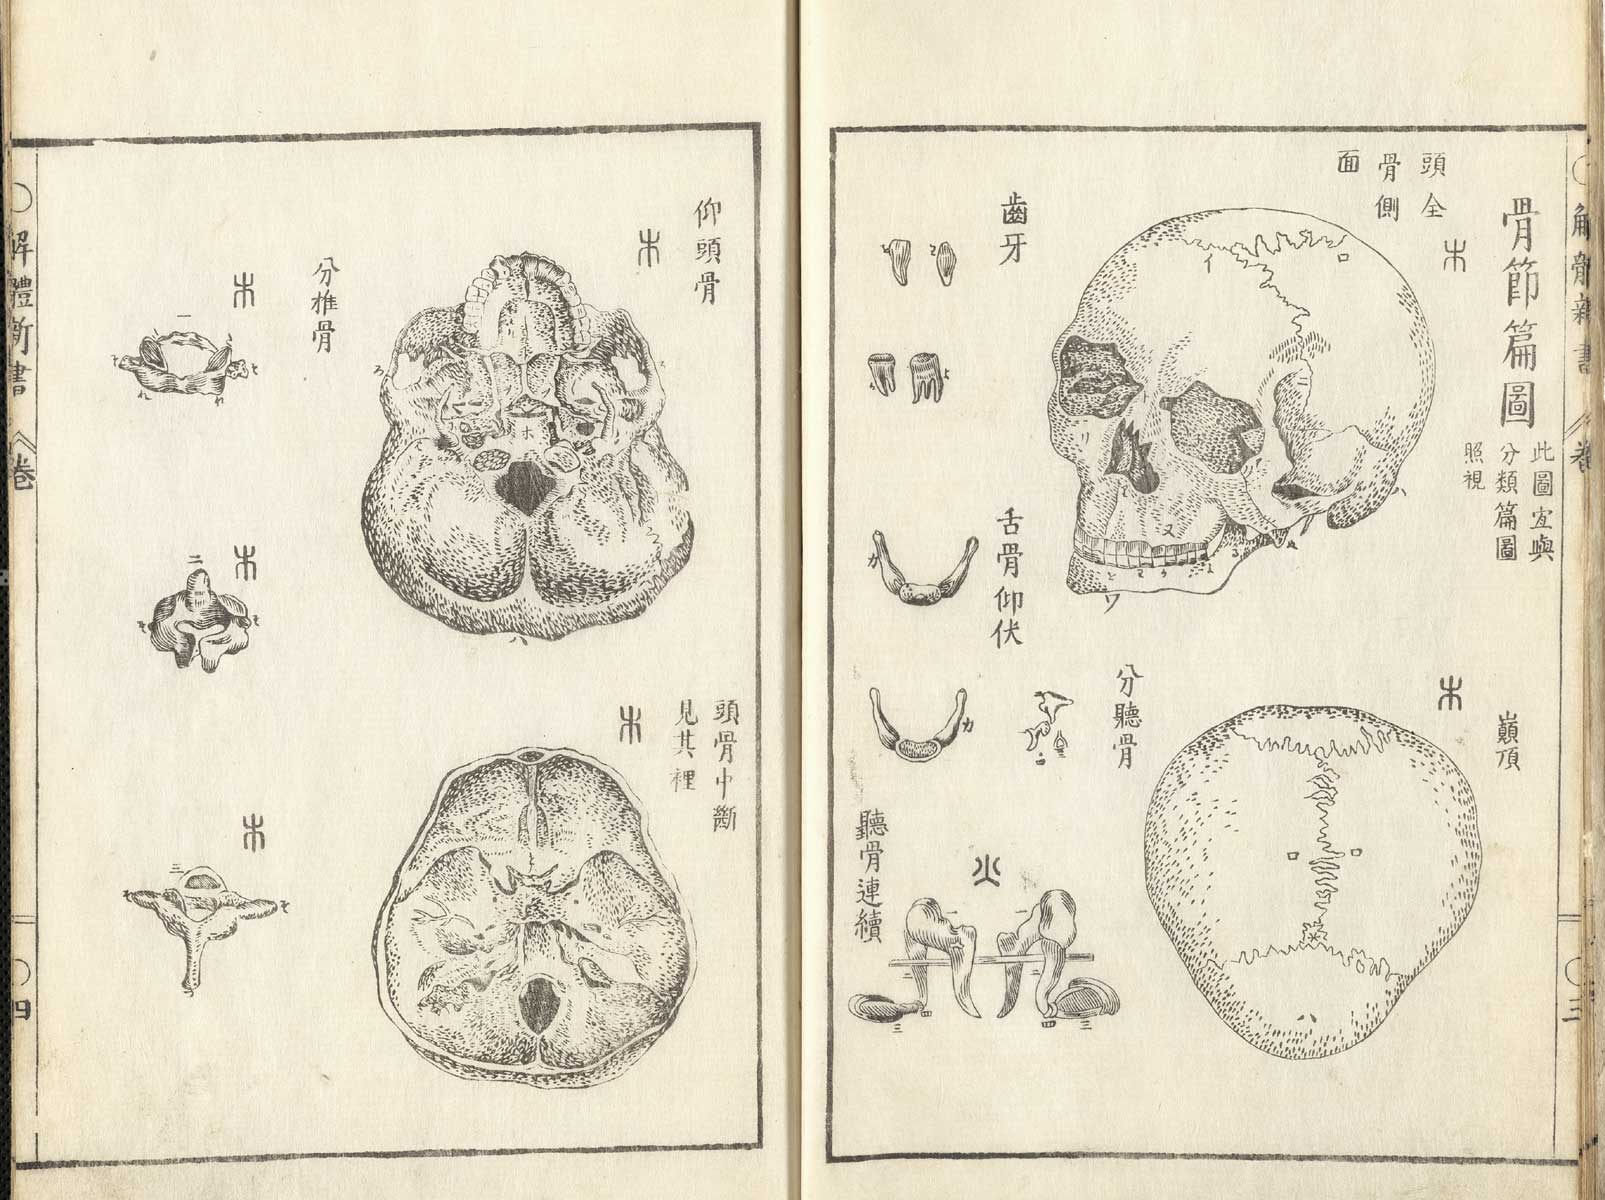 Pages 3 and 4 of Johann Adam Kulmus' Kaitai shinsho. On page 3 are the side and top view of a skull. On page 4 are two illustrations of the cross section of the brain.